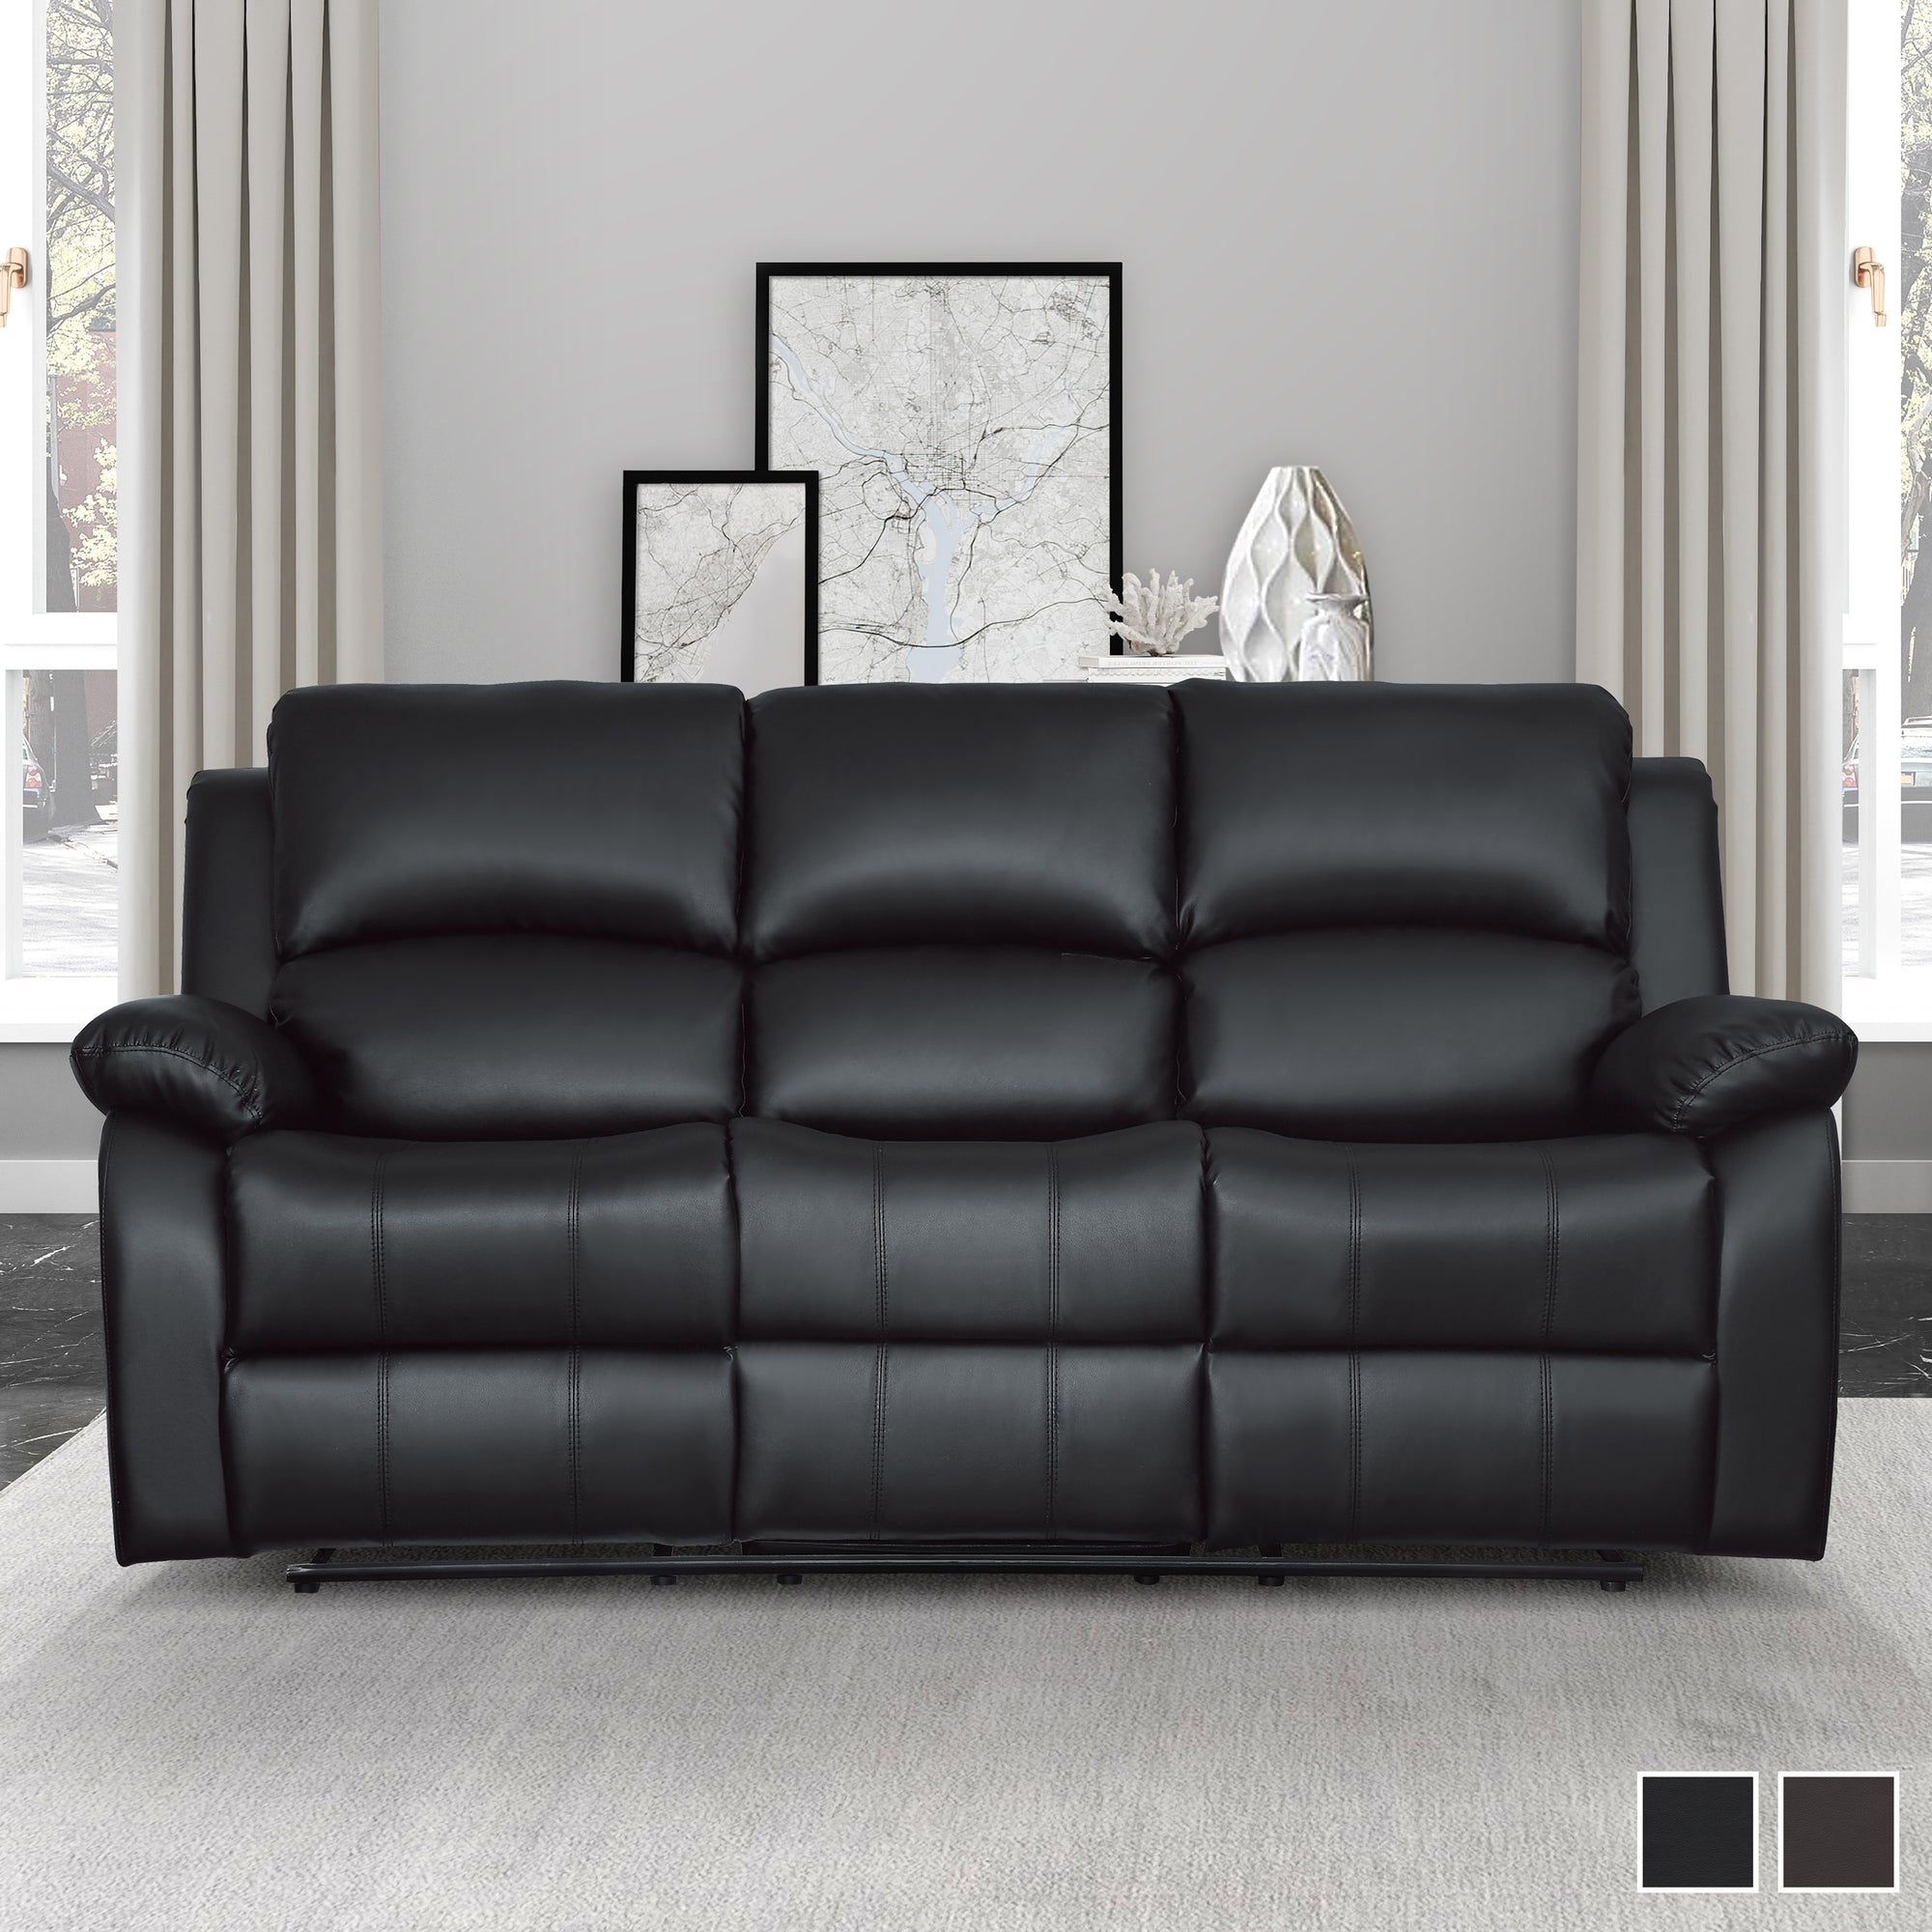 Emilio Double Reclining Sofa with Center Drop-Down Cup Holders